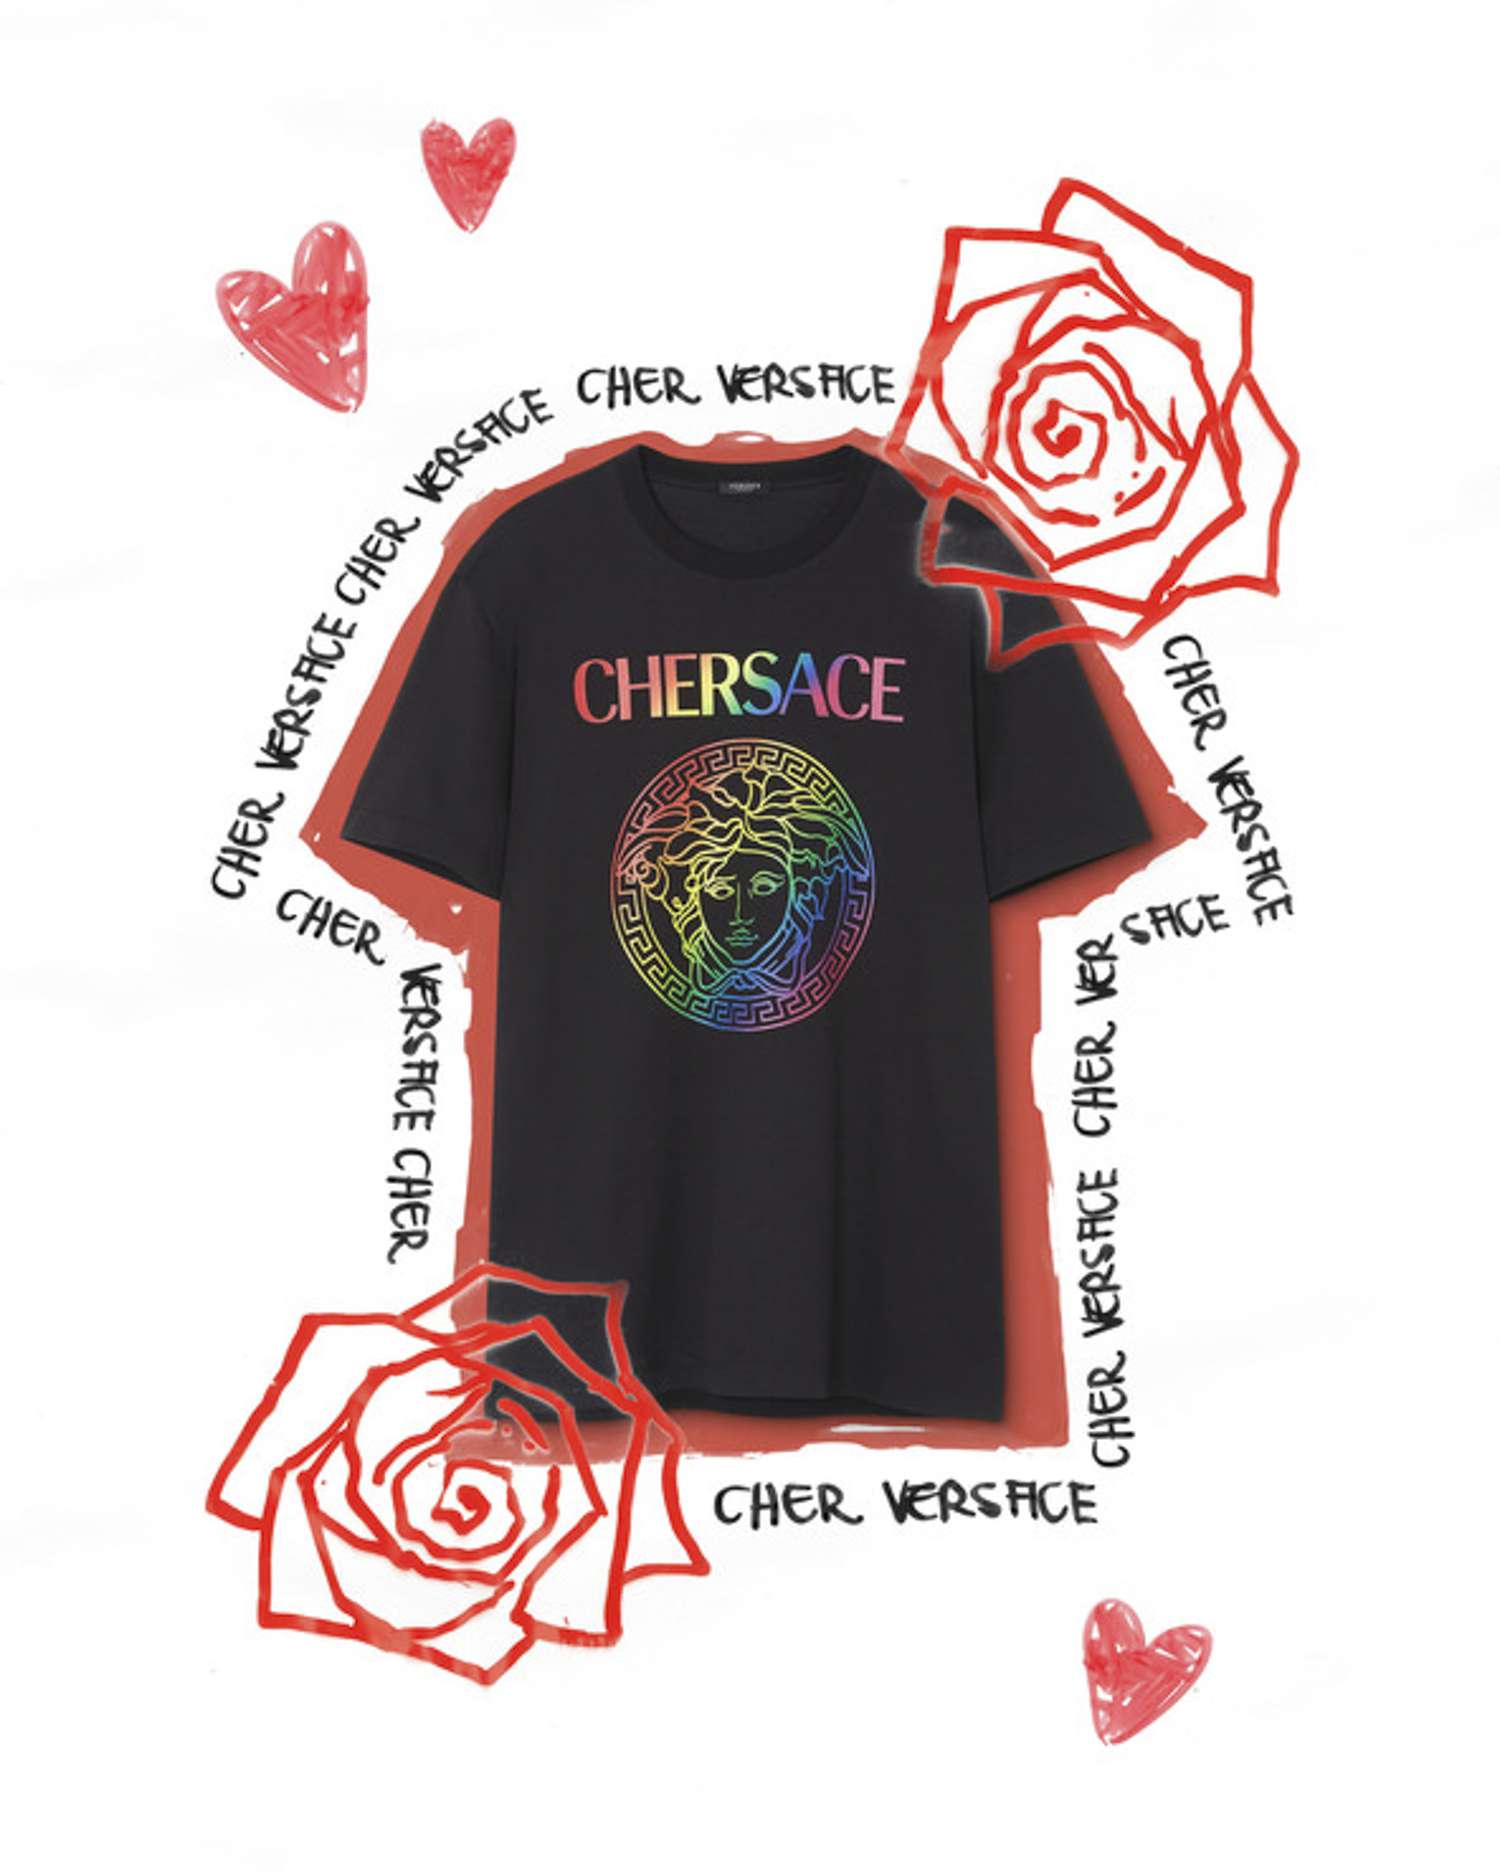 Cher and Donatella Versace Come Together for limited Chersace shirts for Pride